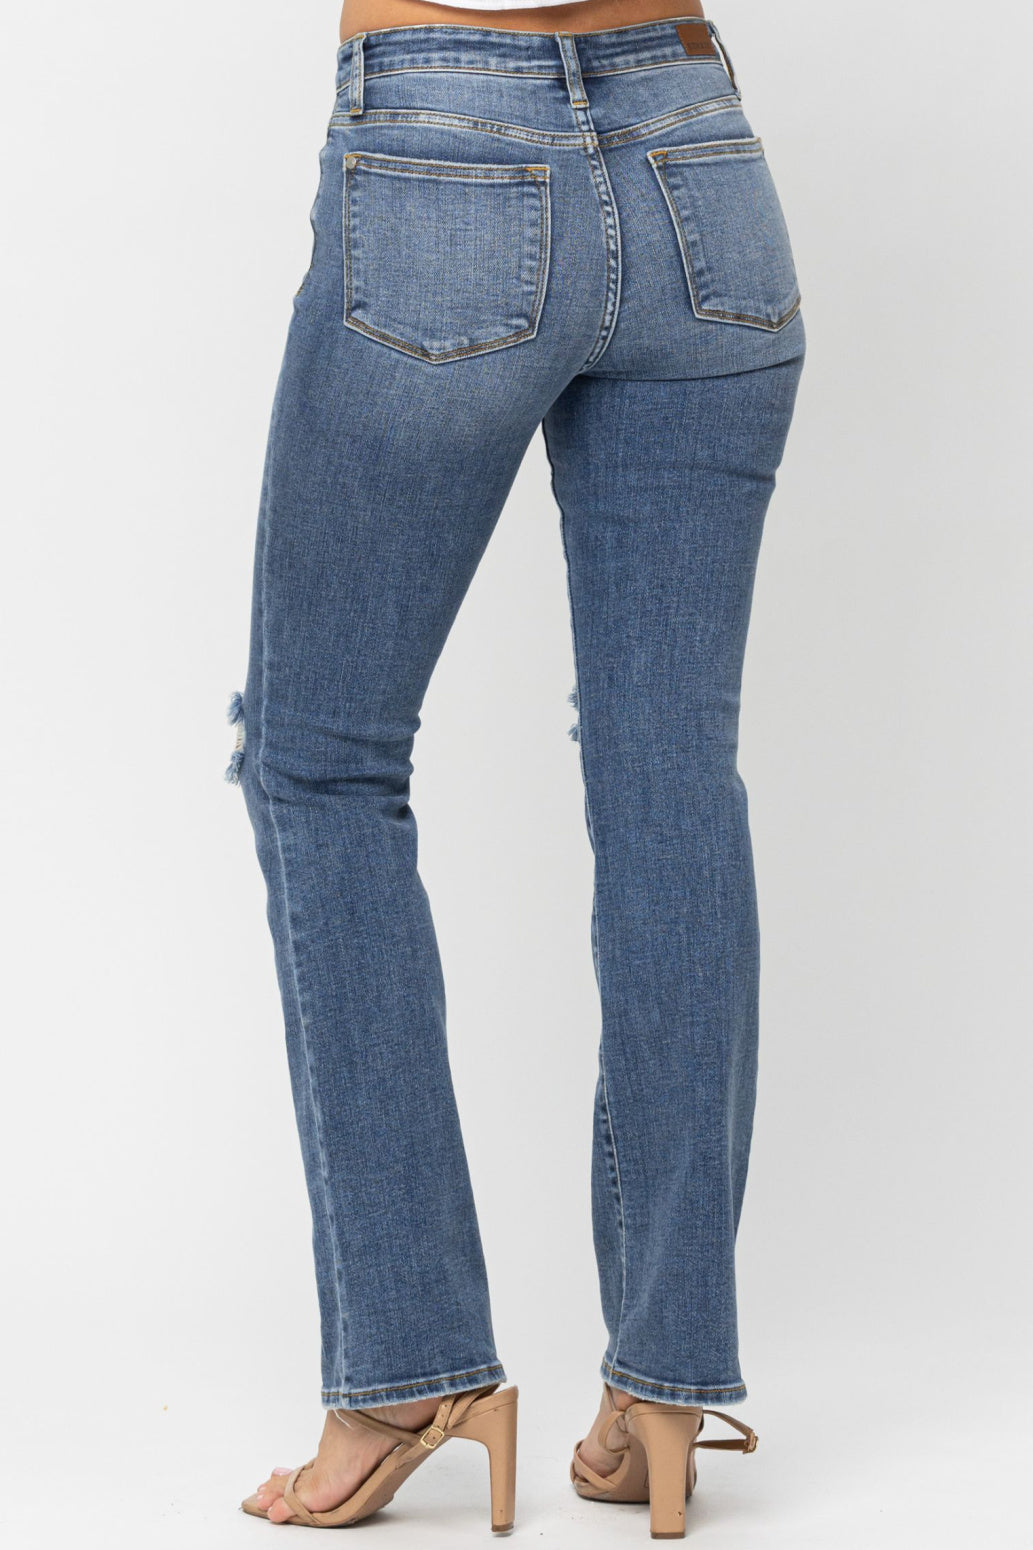 Judy Blue Destroyed Knee Mid-Rise Boot Cut Jeans Style 82264